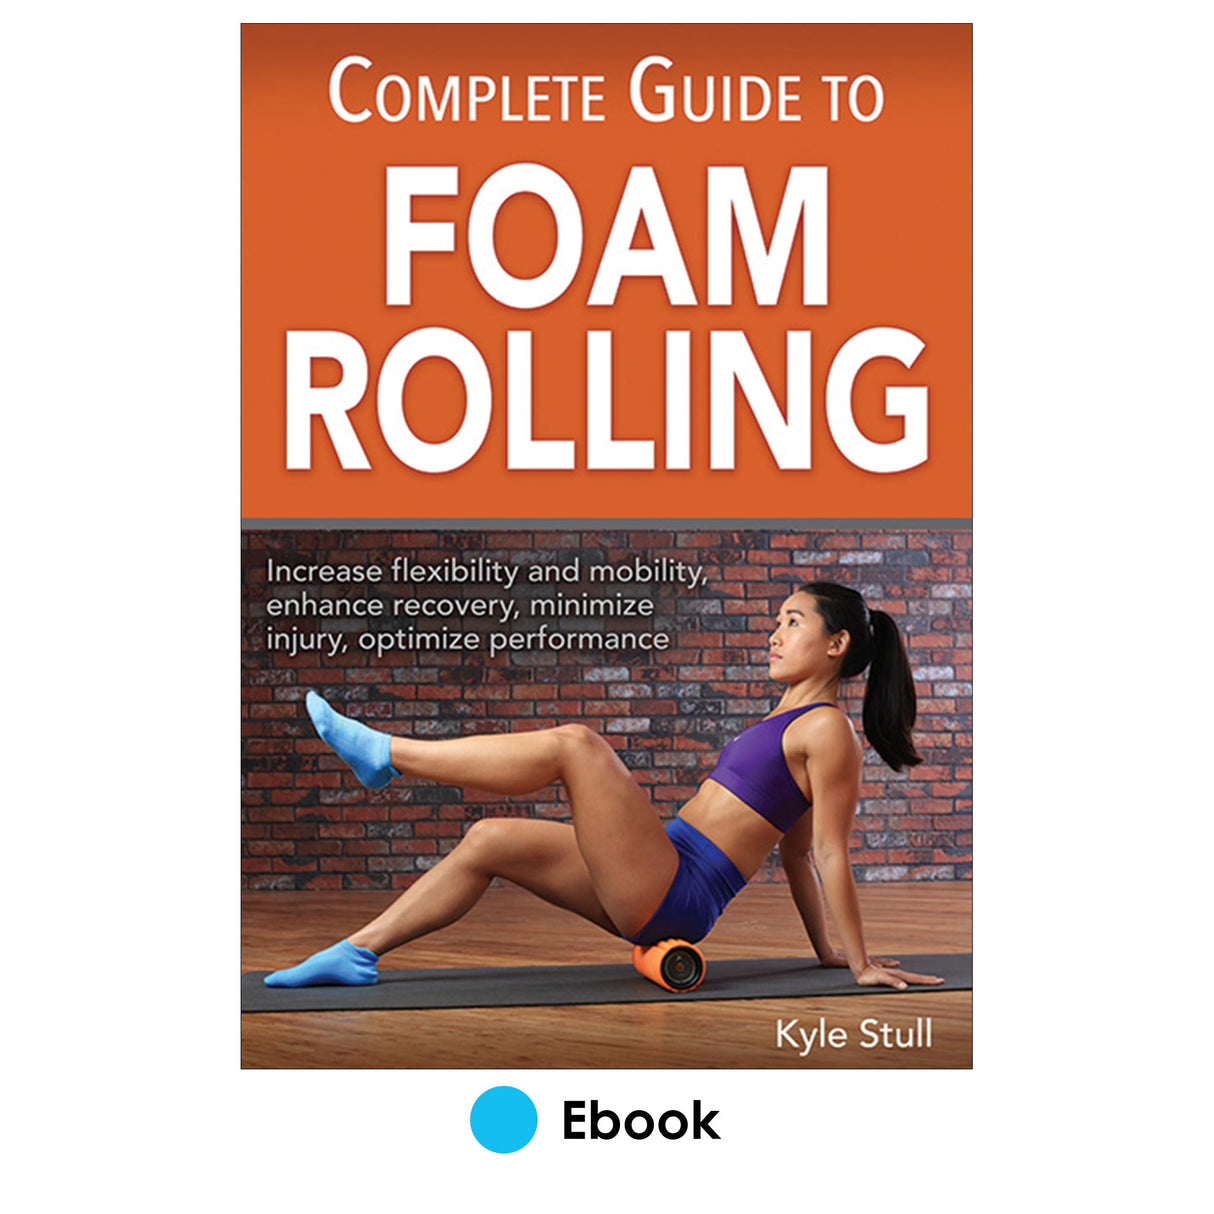 Complete Guide to Foam Rolling PDF